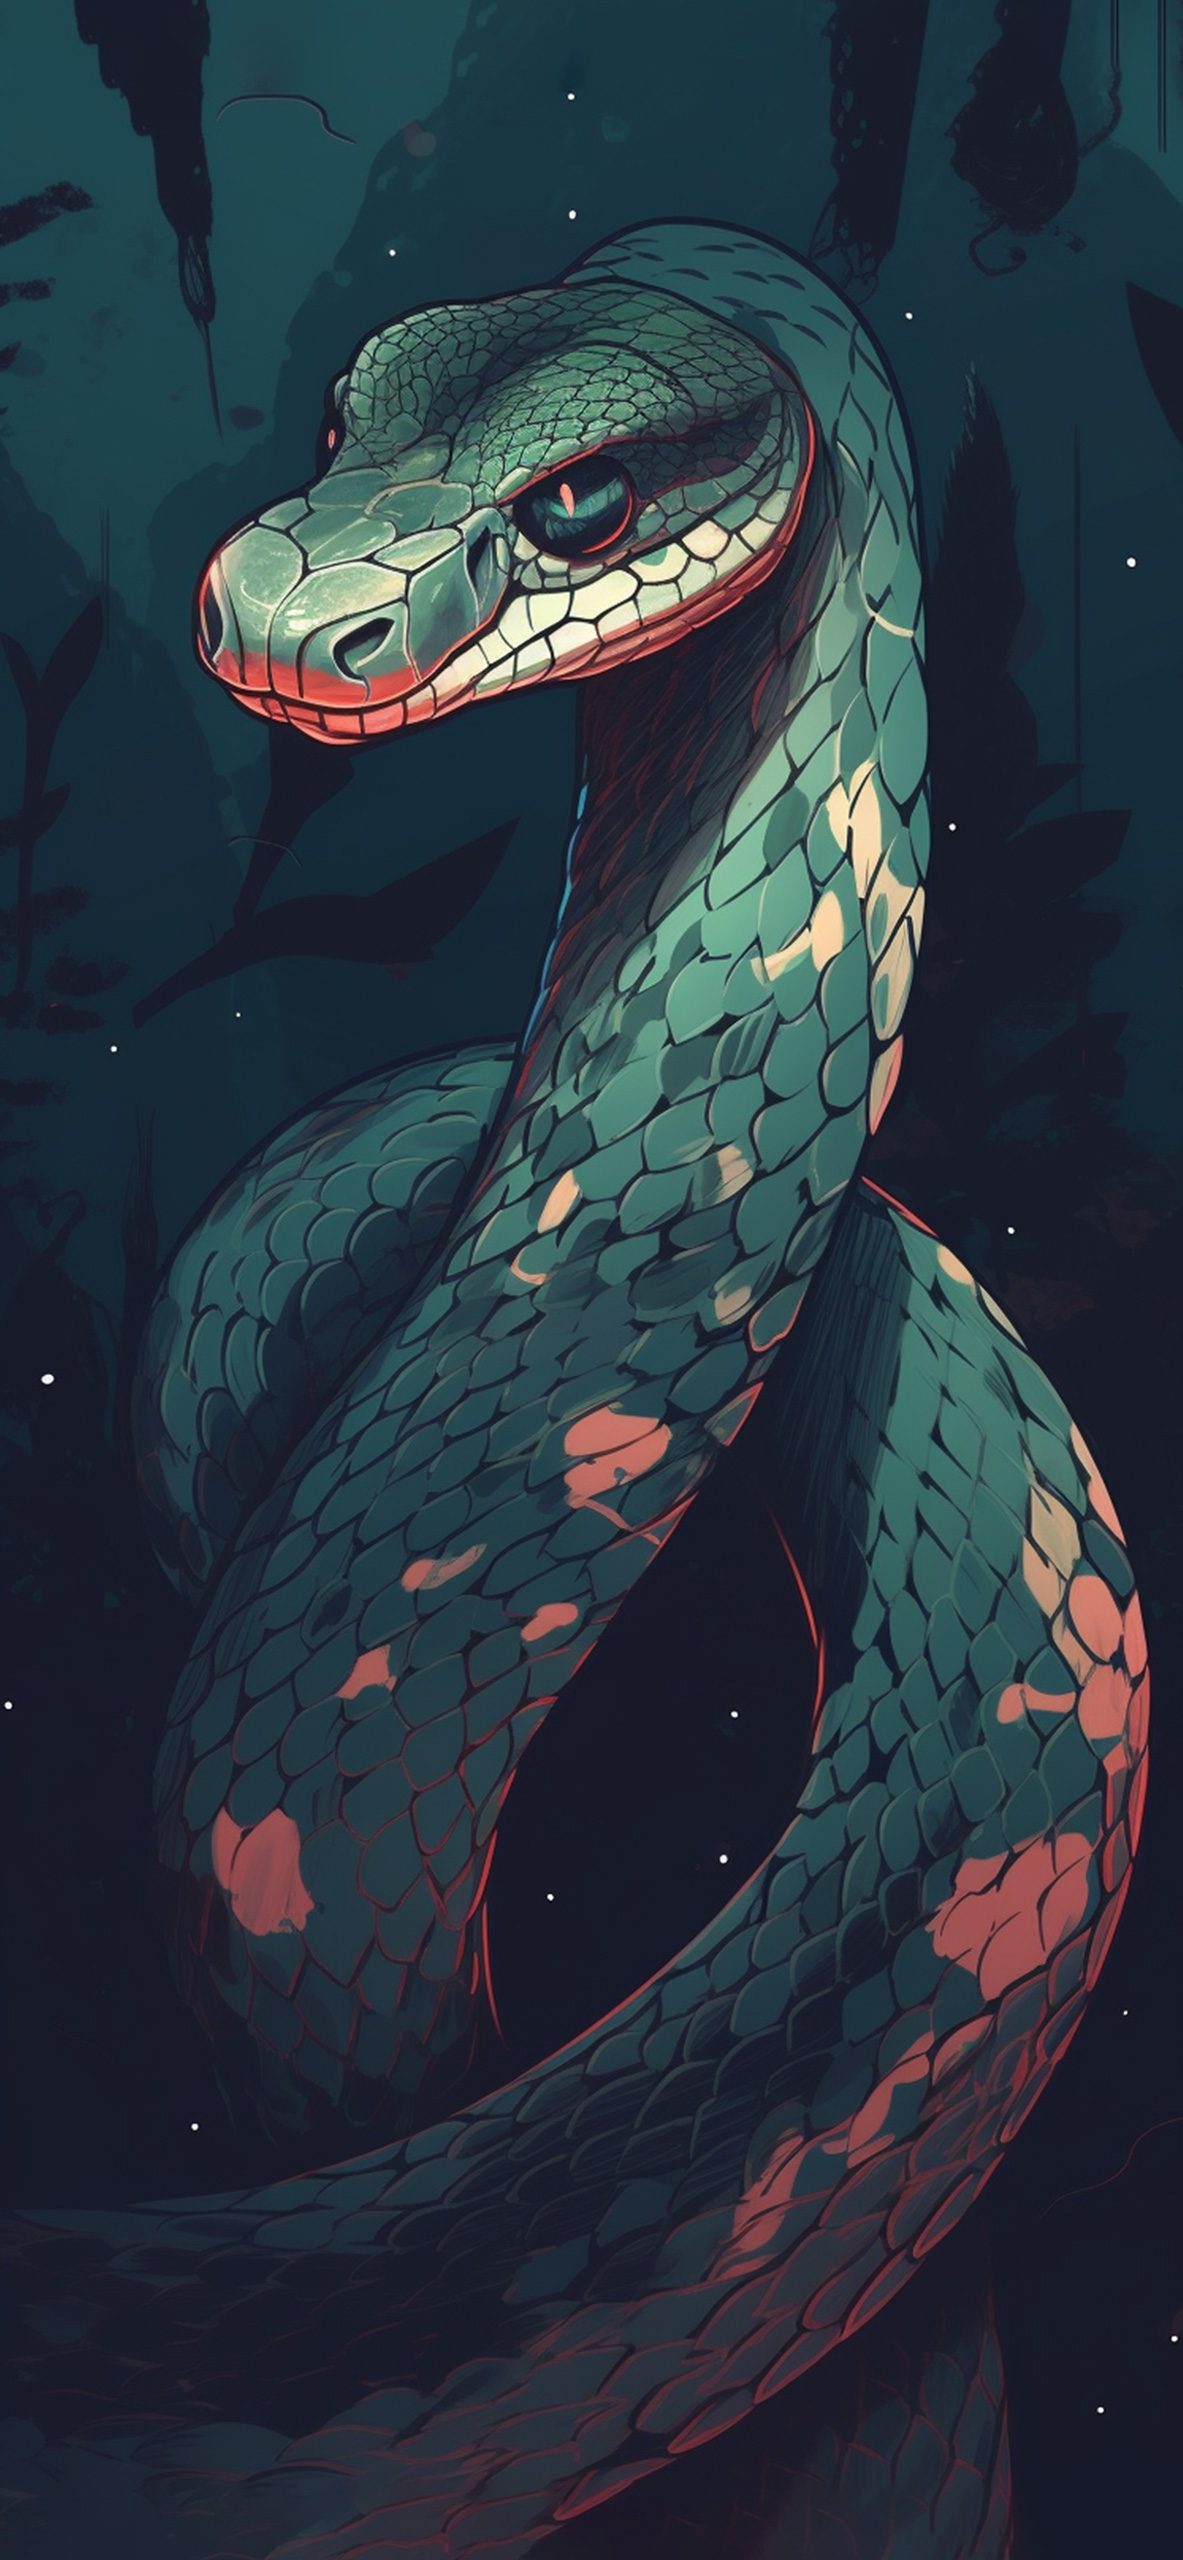 Download wallpaper 1350x2400 snake reptile pattern art iphone  876s6 for parallax hd background